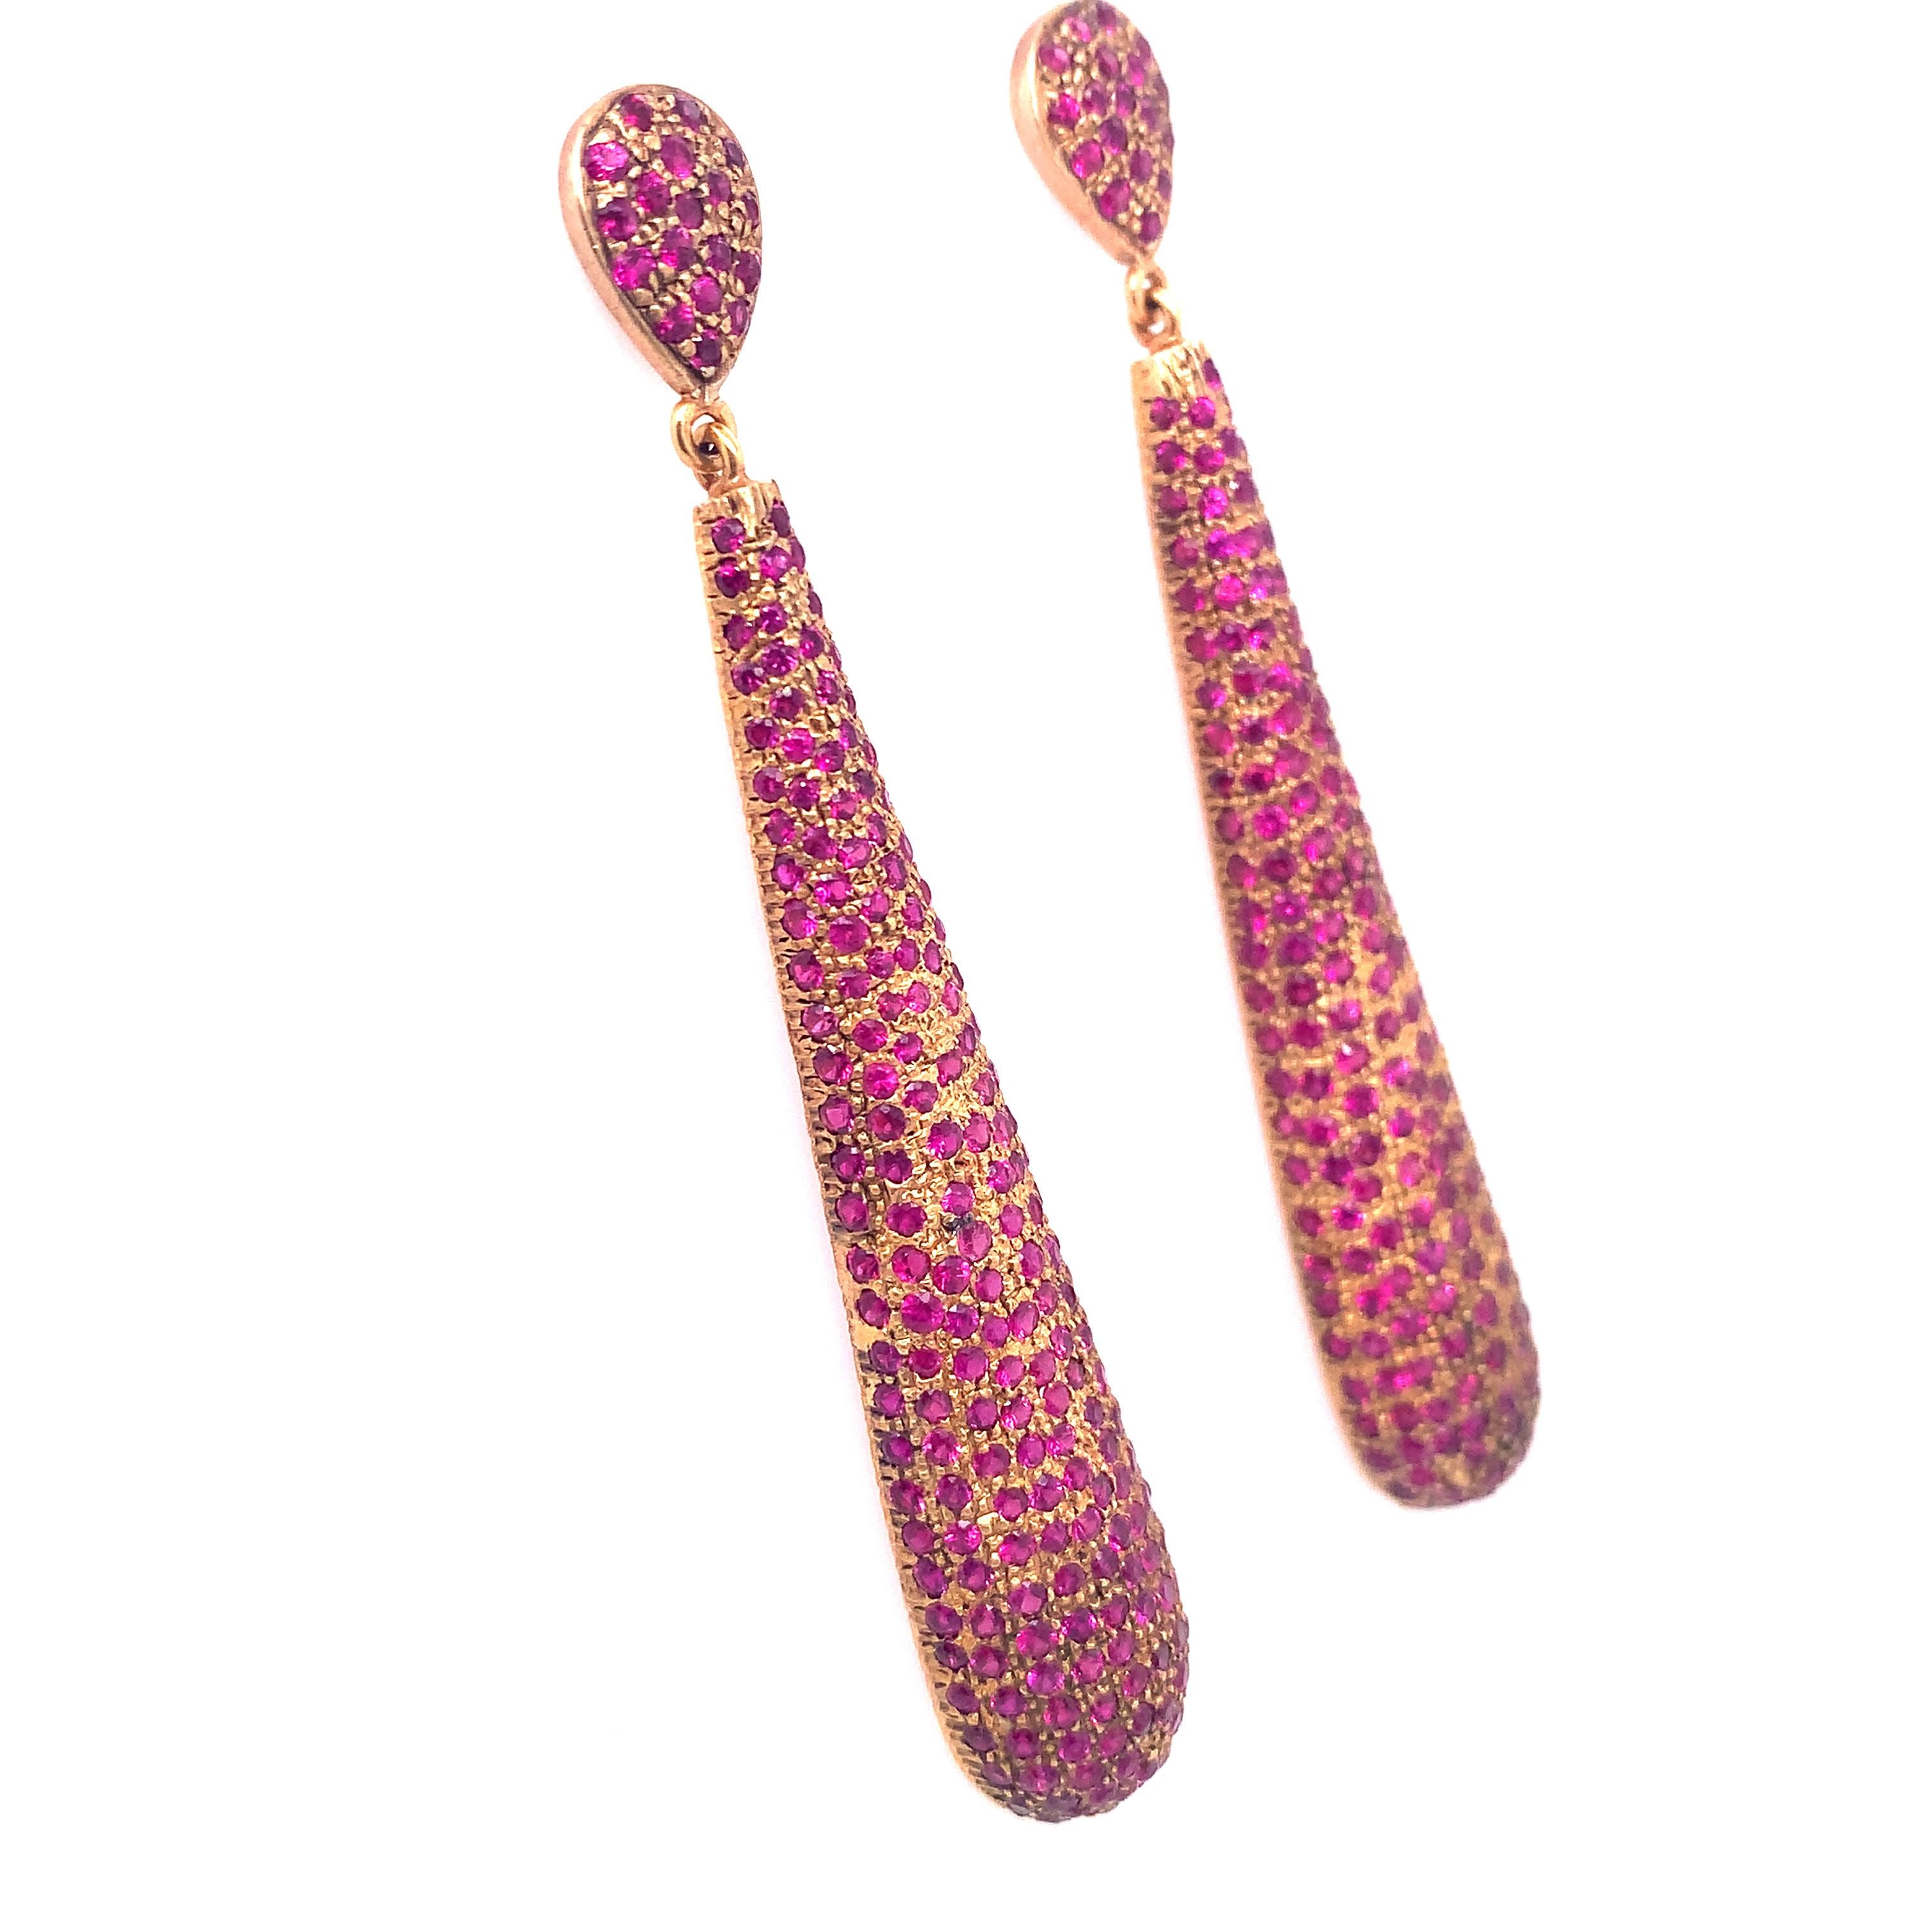 Life In Color Collection 

Bright Crimson Ruby pave pebble elongated earrings set in sterling silver and 14k plated gold

Ruby :  11.73ct total weight.
